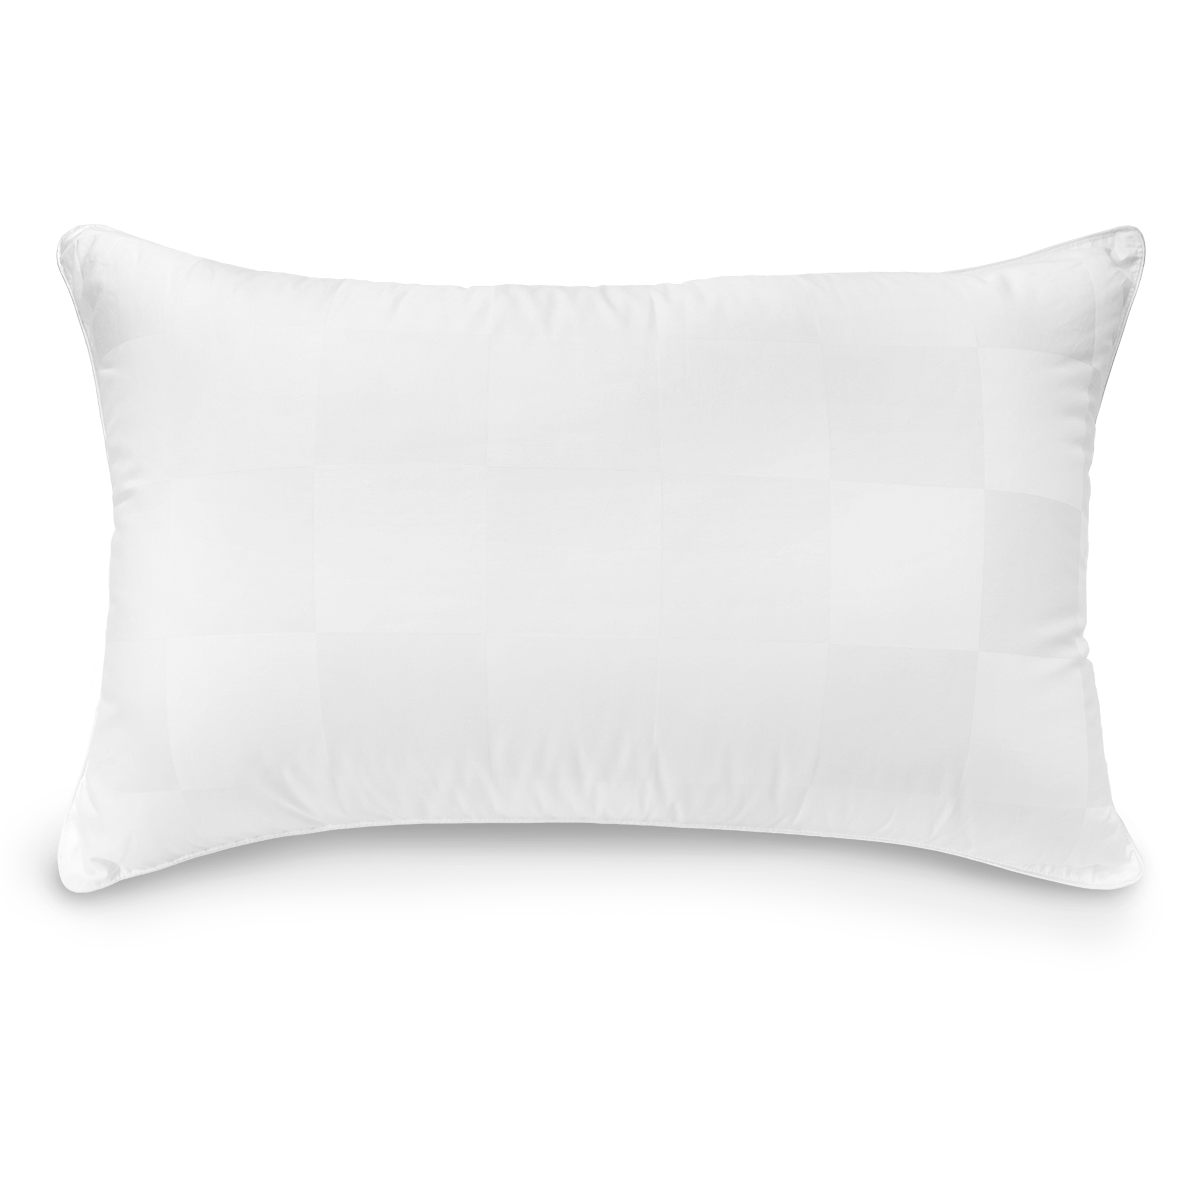 Luxury Cotton Sateen Gusseted Pillow